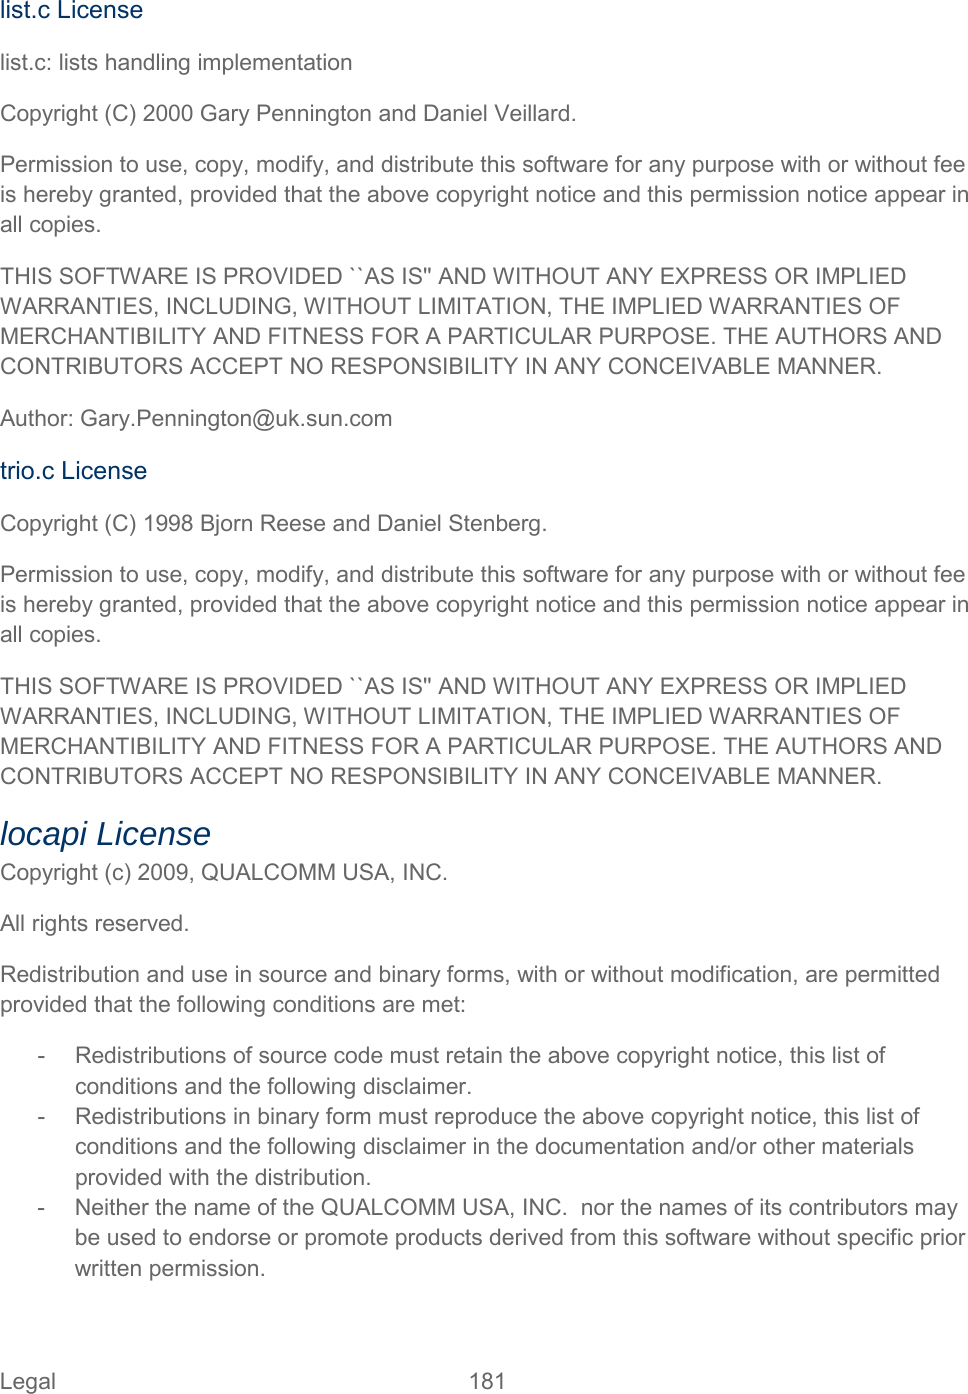 list.c License list.c: lists handling implementation Copyright (C) 2000 Gary Pennington and Daniel Veillard. Permission to use, copy, modify, and distribute this software for any purpose with or without fee is hereby granted, provided that the above copyright notice and this permission notice appear in all copies. THIS SOFTWARE IS PROVIDED ``AS IS&apos;&apos; AND WITHOUT ANY EXPRESS OR IMPLIED WARRANTIES, INCLUDING, WITHOUT LIMITATION, THE IMPLIED WARRANTIES OF MERCHANTIBILITY AND FITNESS FOR A PARTICULAR PURPOSE. THE AUTHORS AND CONTRIBUTORS ACCEPT NO RESPONSIBILITY IN ANY CONCEIVABLE MANNER. Author: Gary.Pennington@uk.sun.com trio.c License Copyright (C) 1998 Bjorn Reese and Daniel Stenberg. Permission to use, copy, modify, and distribute this software for any purpose with or without fee is hereby granted, provided that the above copyright notice and this permission notice appear in all copies. THIS SOFTWARE IS PROVIDED ``AS IS&apos;&apos; AND WITHOUT ANY EXPRESS OR IMPLIED WARRANTIES, INCLUDING, WITHOUT LIMITATION, THE IMPLIED WARRANTIES OF MERCHANTIBILITY AND FITNESS FOR A PARTICULAR PURPOSE. THE AUTHORS AND CONTRIBUTORS ACCEPT NO RESPONSIBILITY IN ANY CONCEIVABLE MANNER. locapi License  Copyright (c) 2009, QUALCOMM USA, INC. All rights reserved. Redistribution and use in source and binary forms, with or without modification, are permitted provided that the following conditions are met: -  Redistributions of source code must retain the above copyright notice, this list of conditions and the following disclaimer. -  Redistributions in binary form must reproduce the above copyright notice, this list of conditions and the following disclaimer in the documentation and/or other materials provided with the distribution. -  Neither the name of the QUALCOMM USA, INC.  nor the names of its contributors may be used to endorse or promote products derived from this software without specific prior written permission. Legal 181   